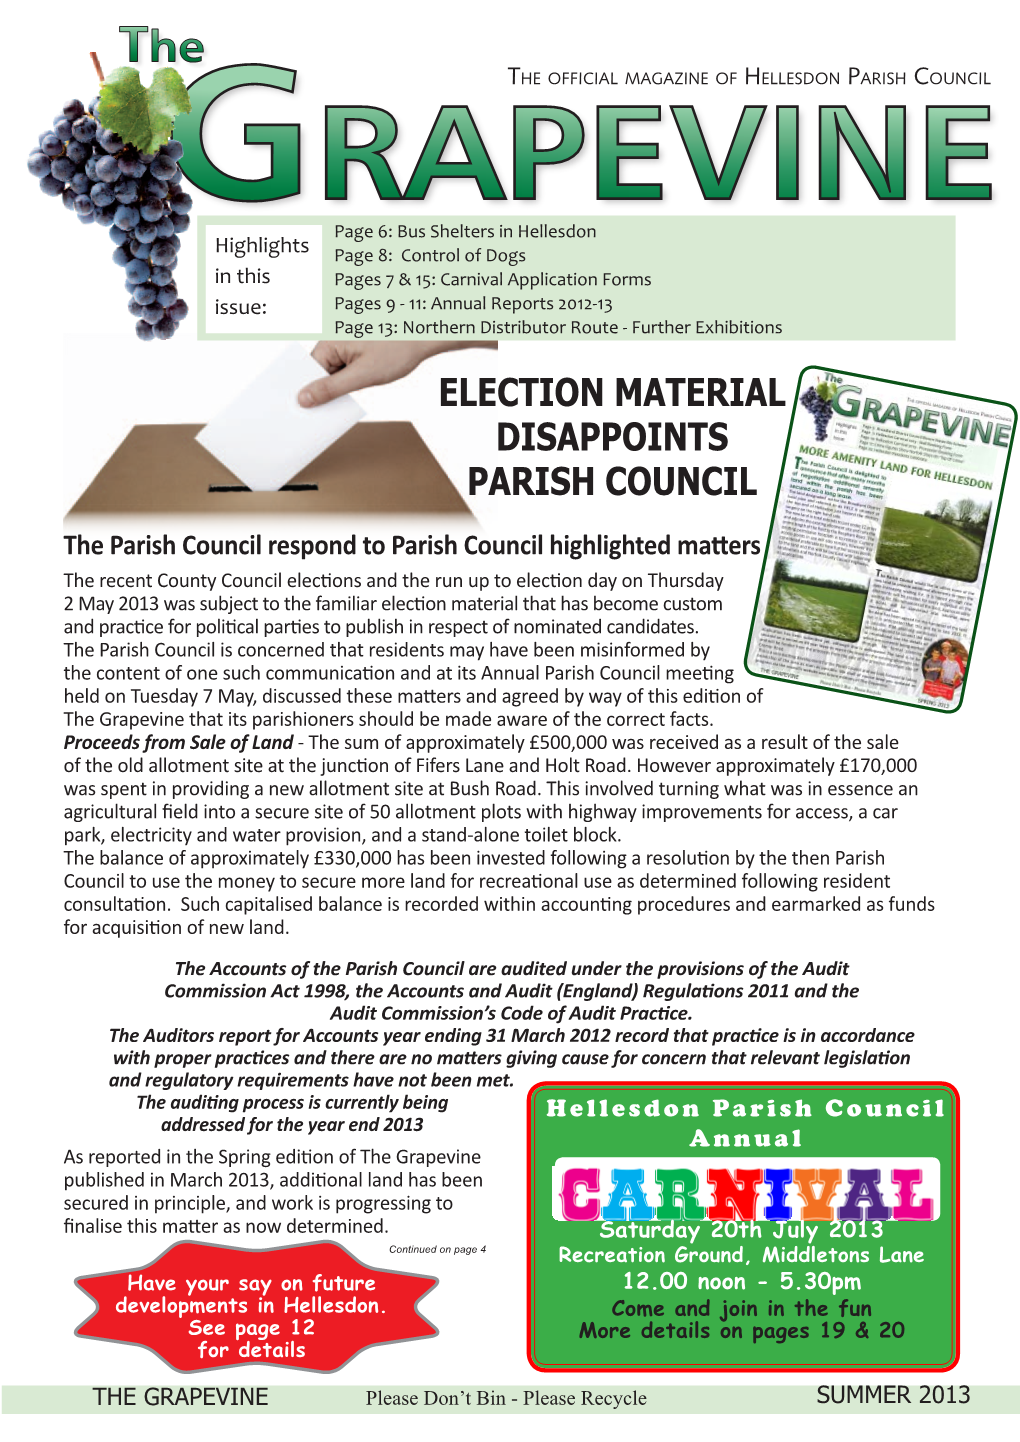 Election Material Disappoints Parish Council